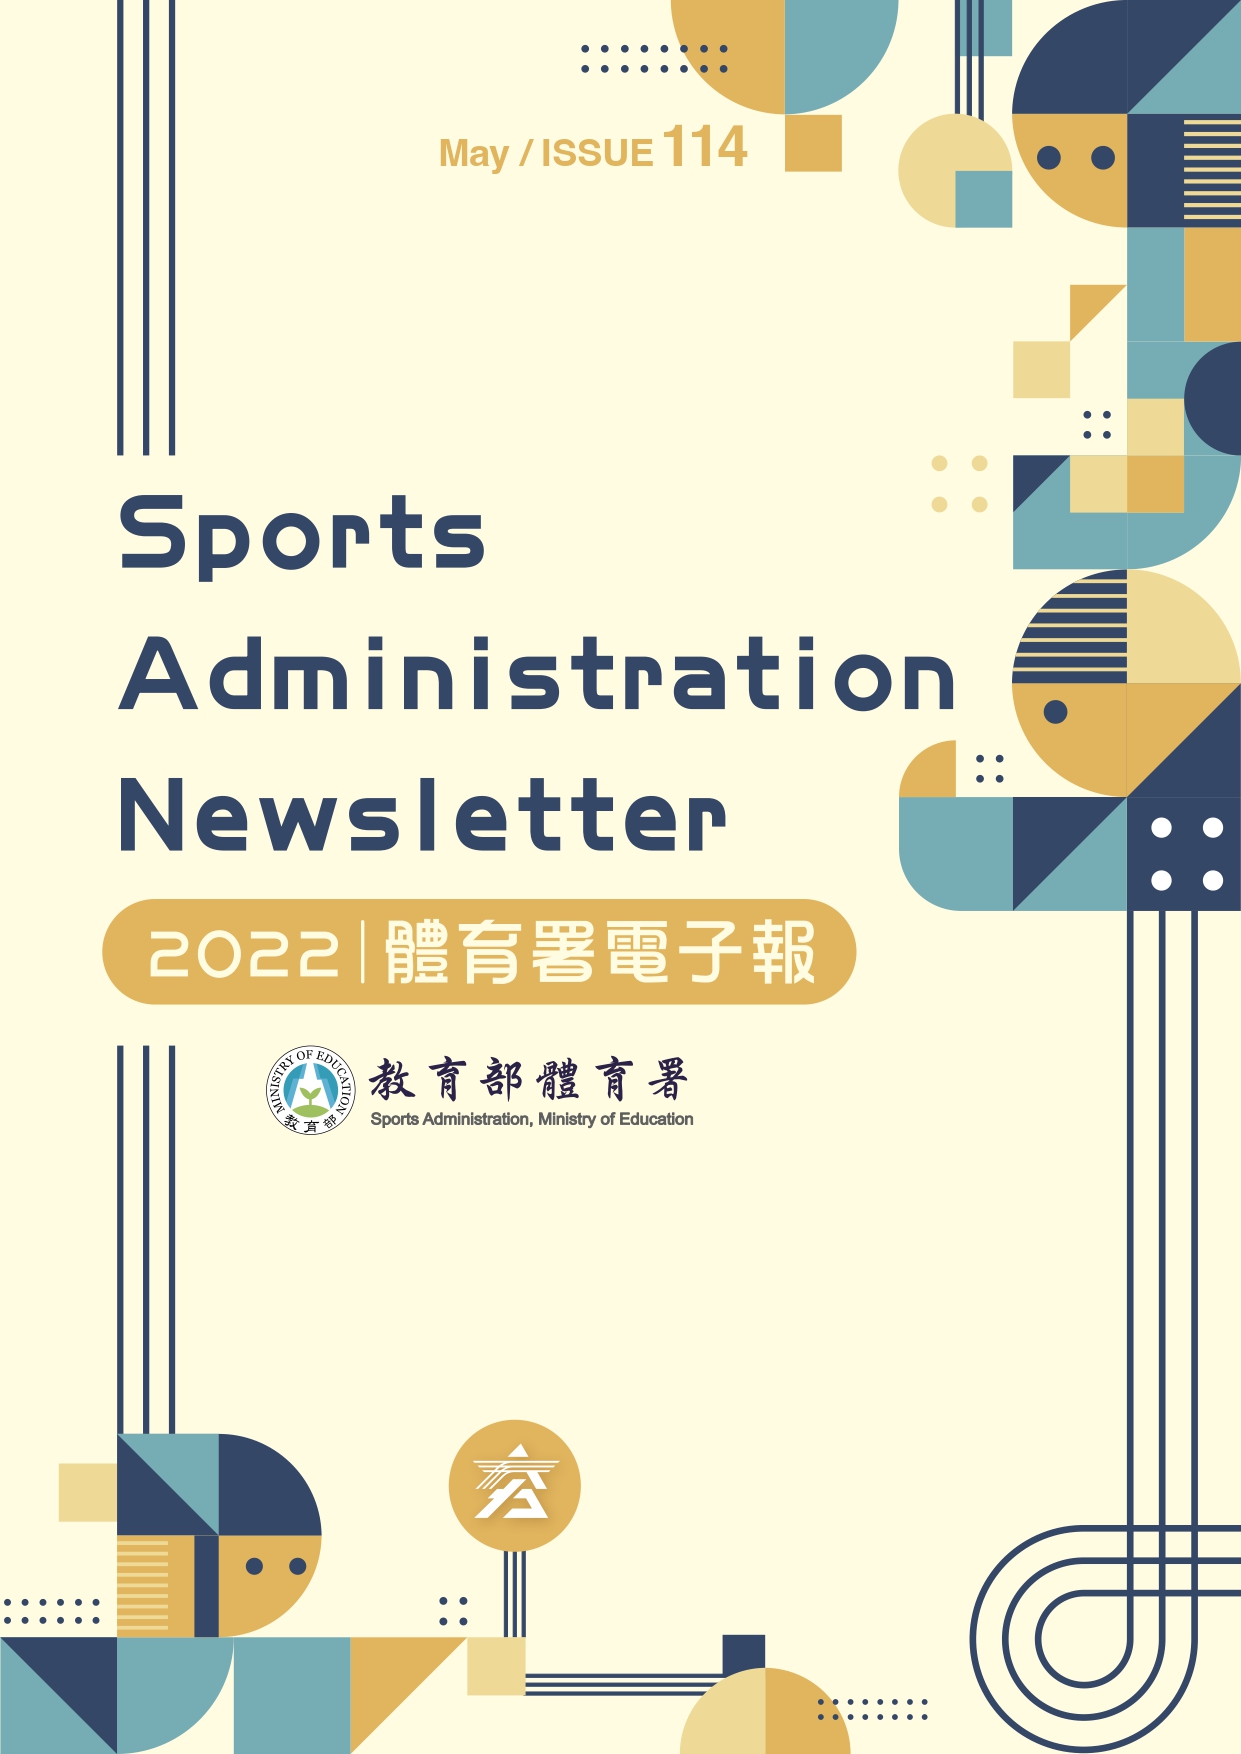 Sports Administration Newsletter #114 May 2022 (18 pages)